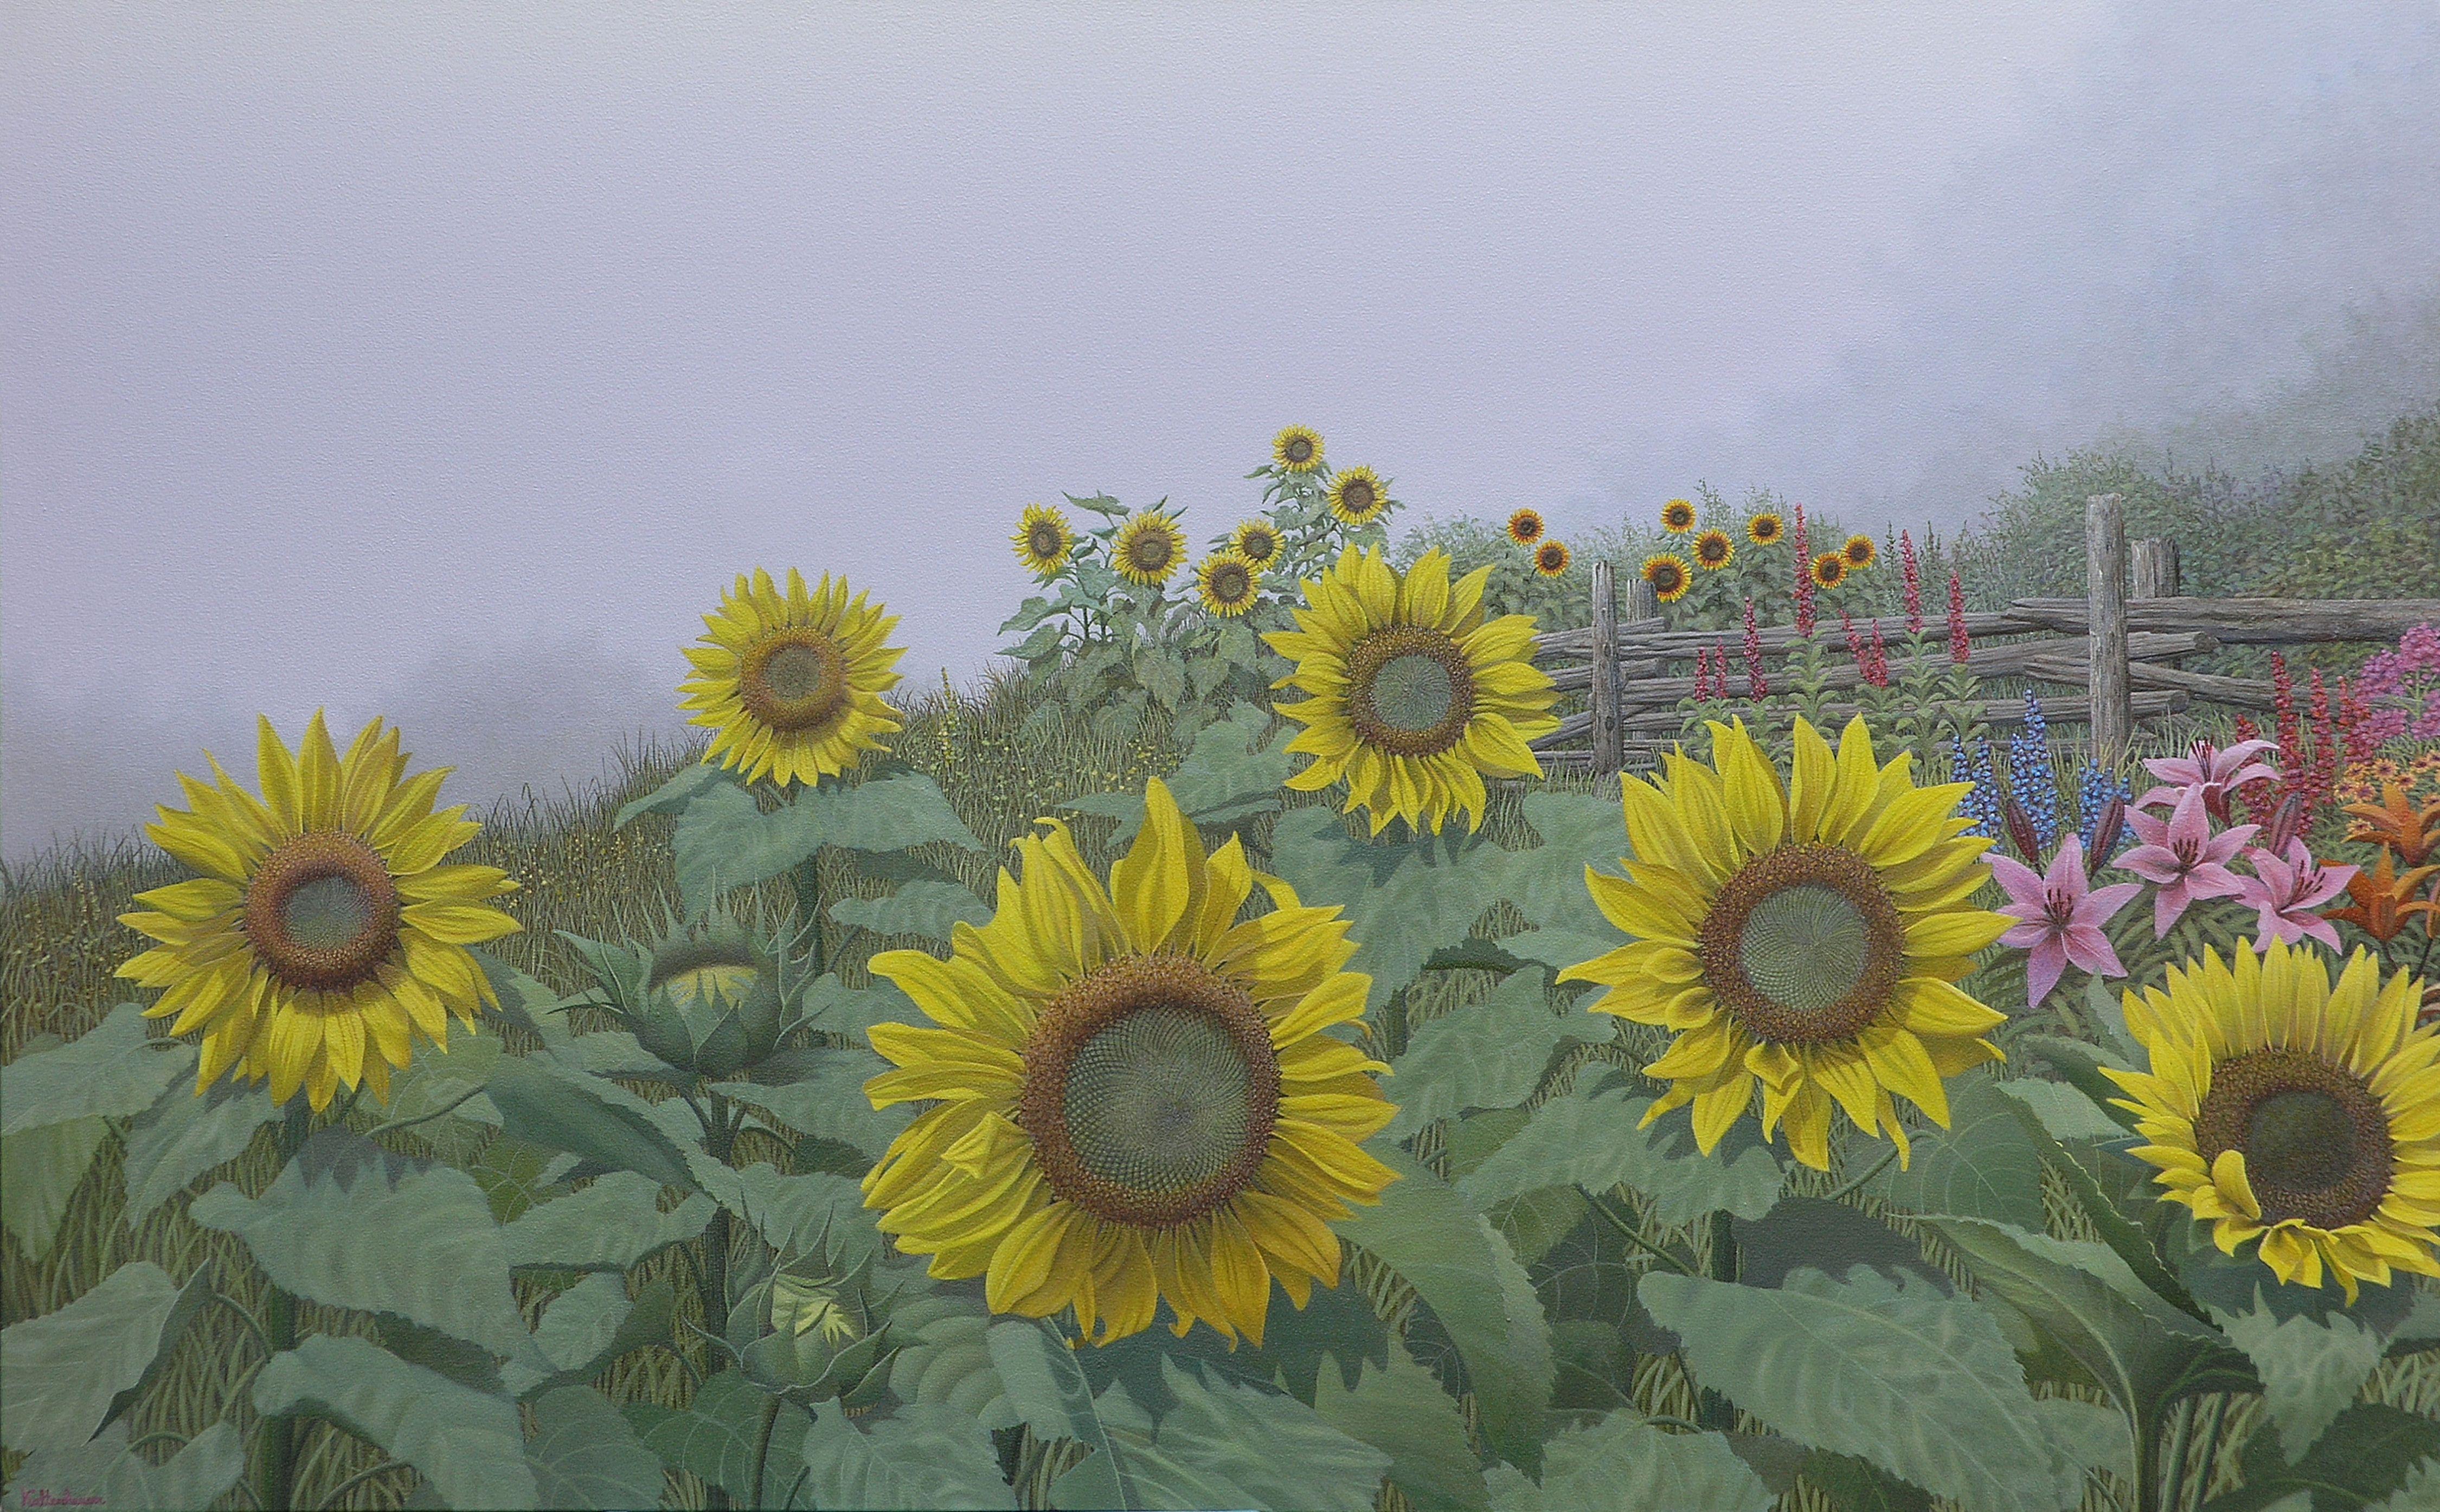 In this creation I chose a muted grey for the sky as I wanted the focus to be on the sunflowers and the background to compliment, not take over. This was purely from my imagination using photos as reference materials.  ** Please note that due to the